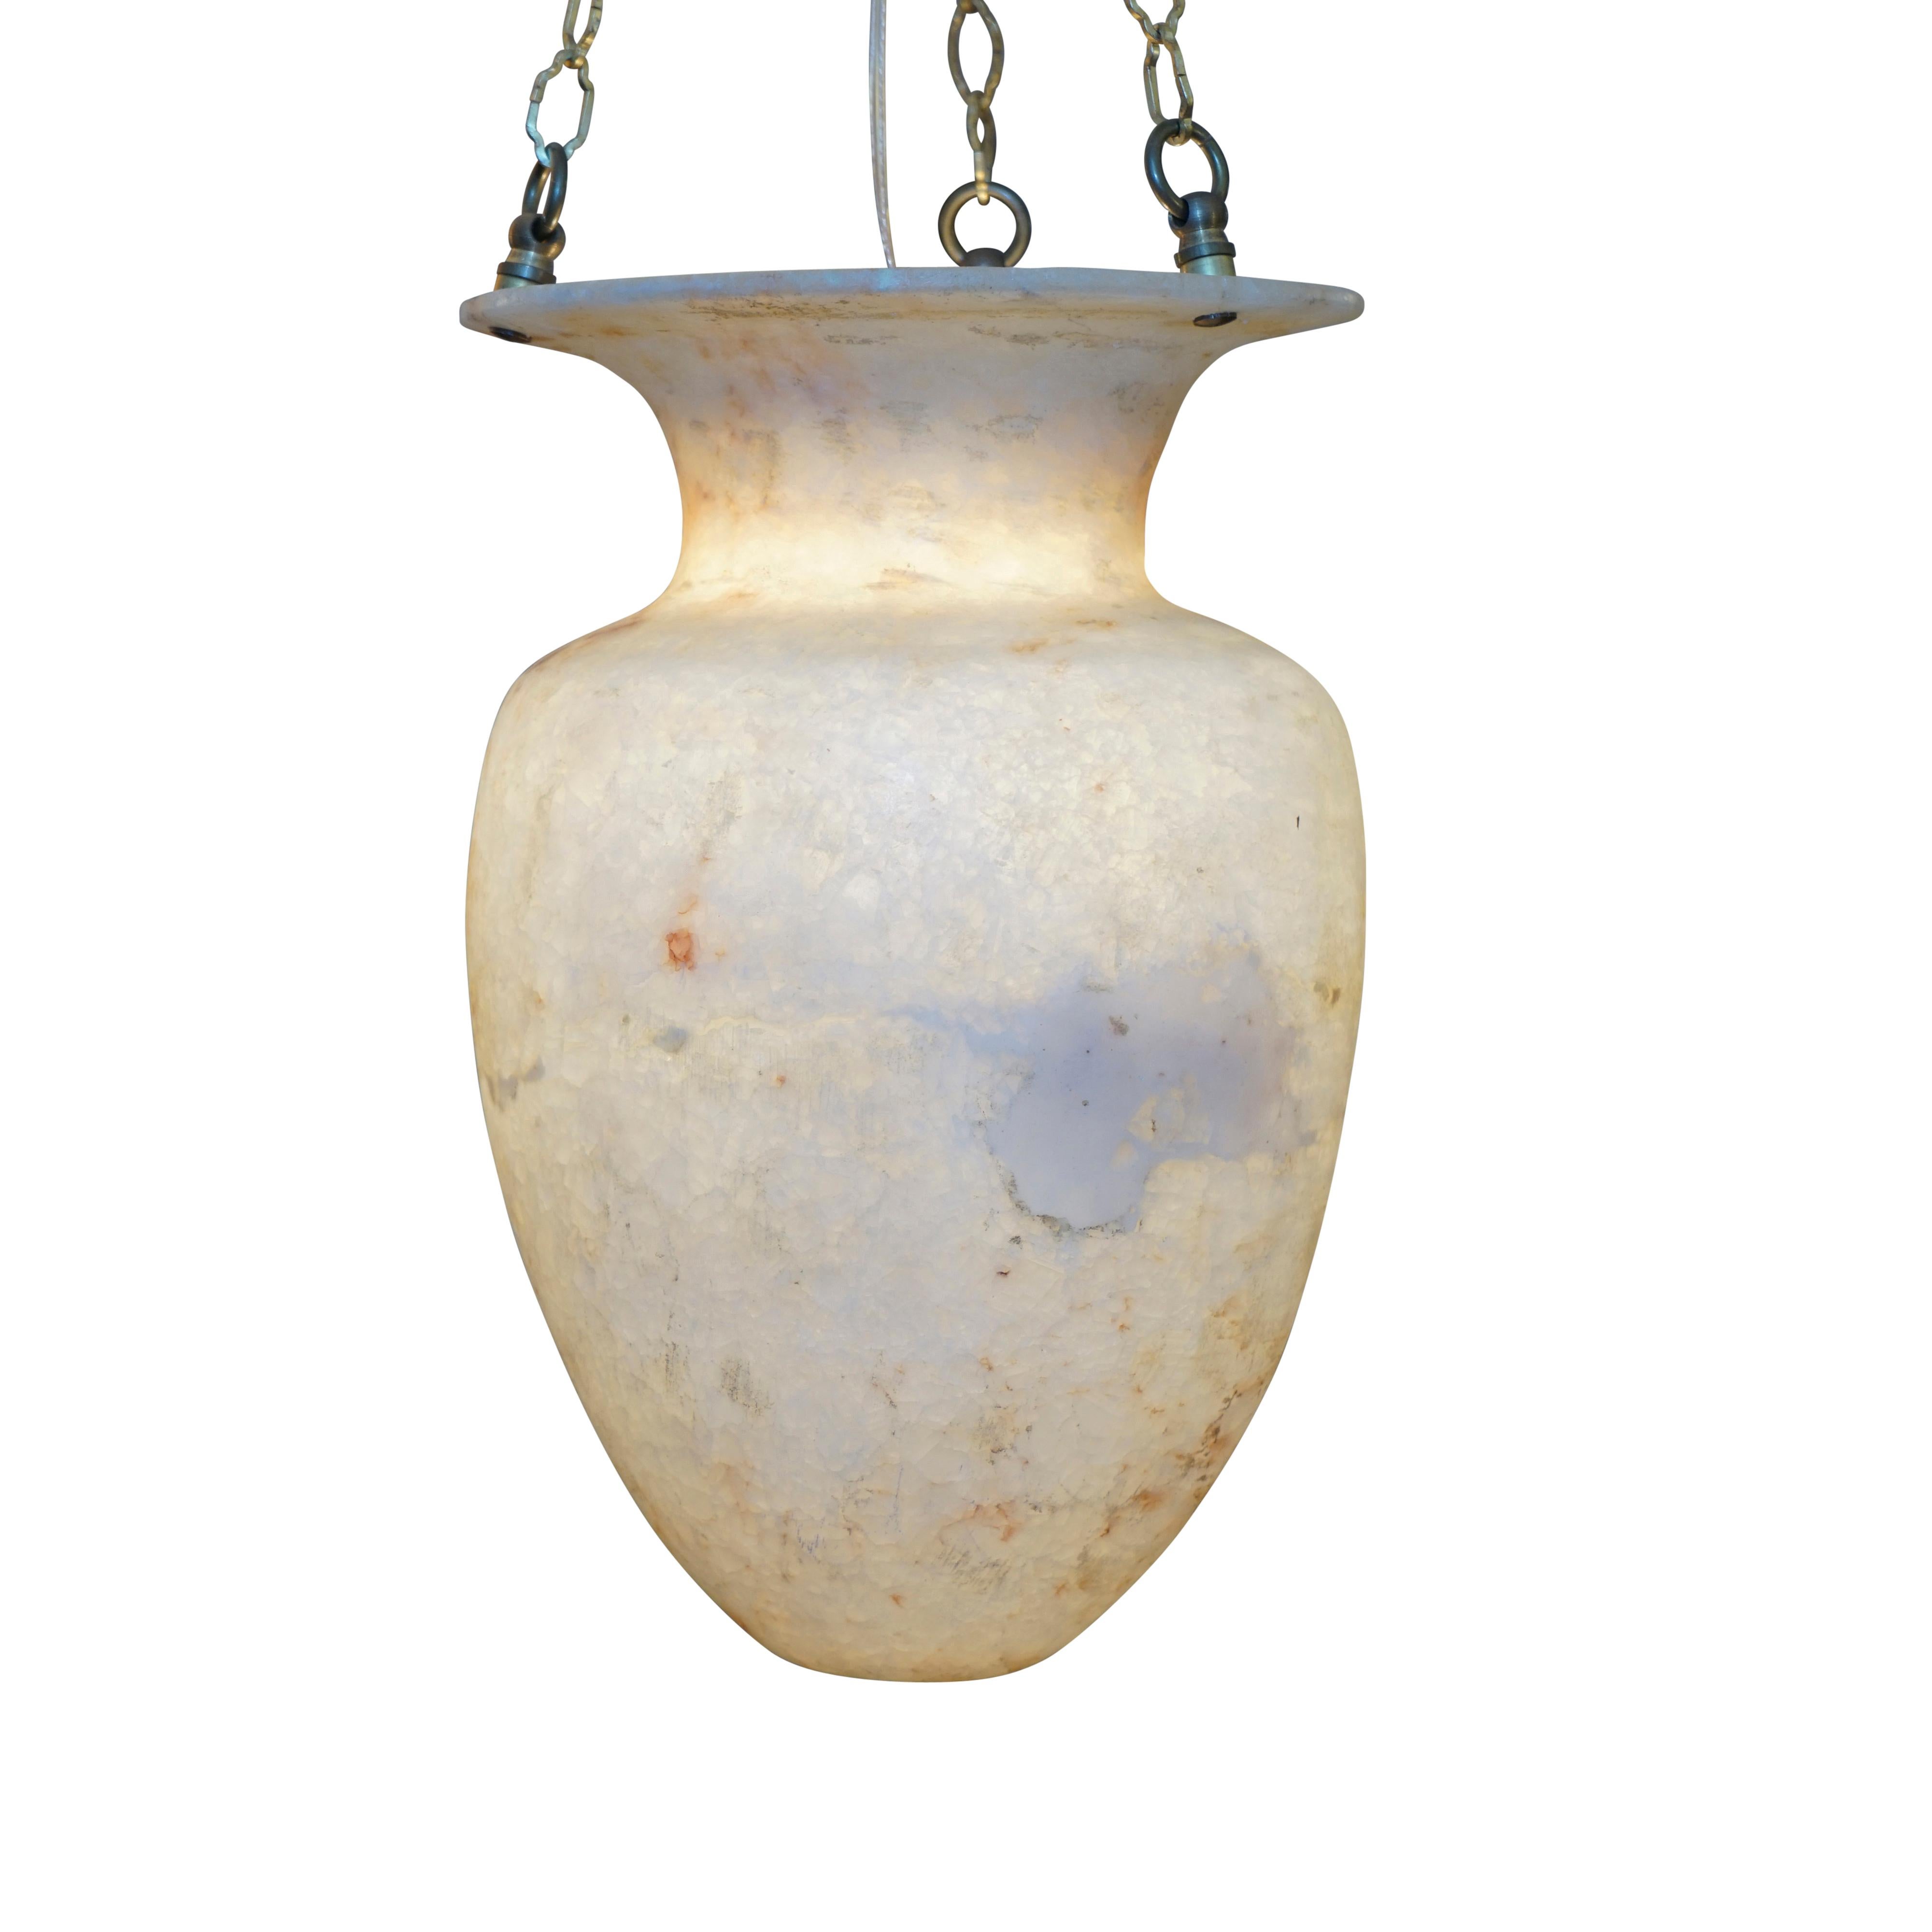 Carved of a unique crystalized cream and gold alabaster, this Amphora shaped light fixture reflects the artist's fascination with creating a vessel using electricity with an ancient material and ancient form. Recently rewired, this light fixture